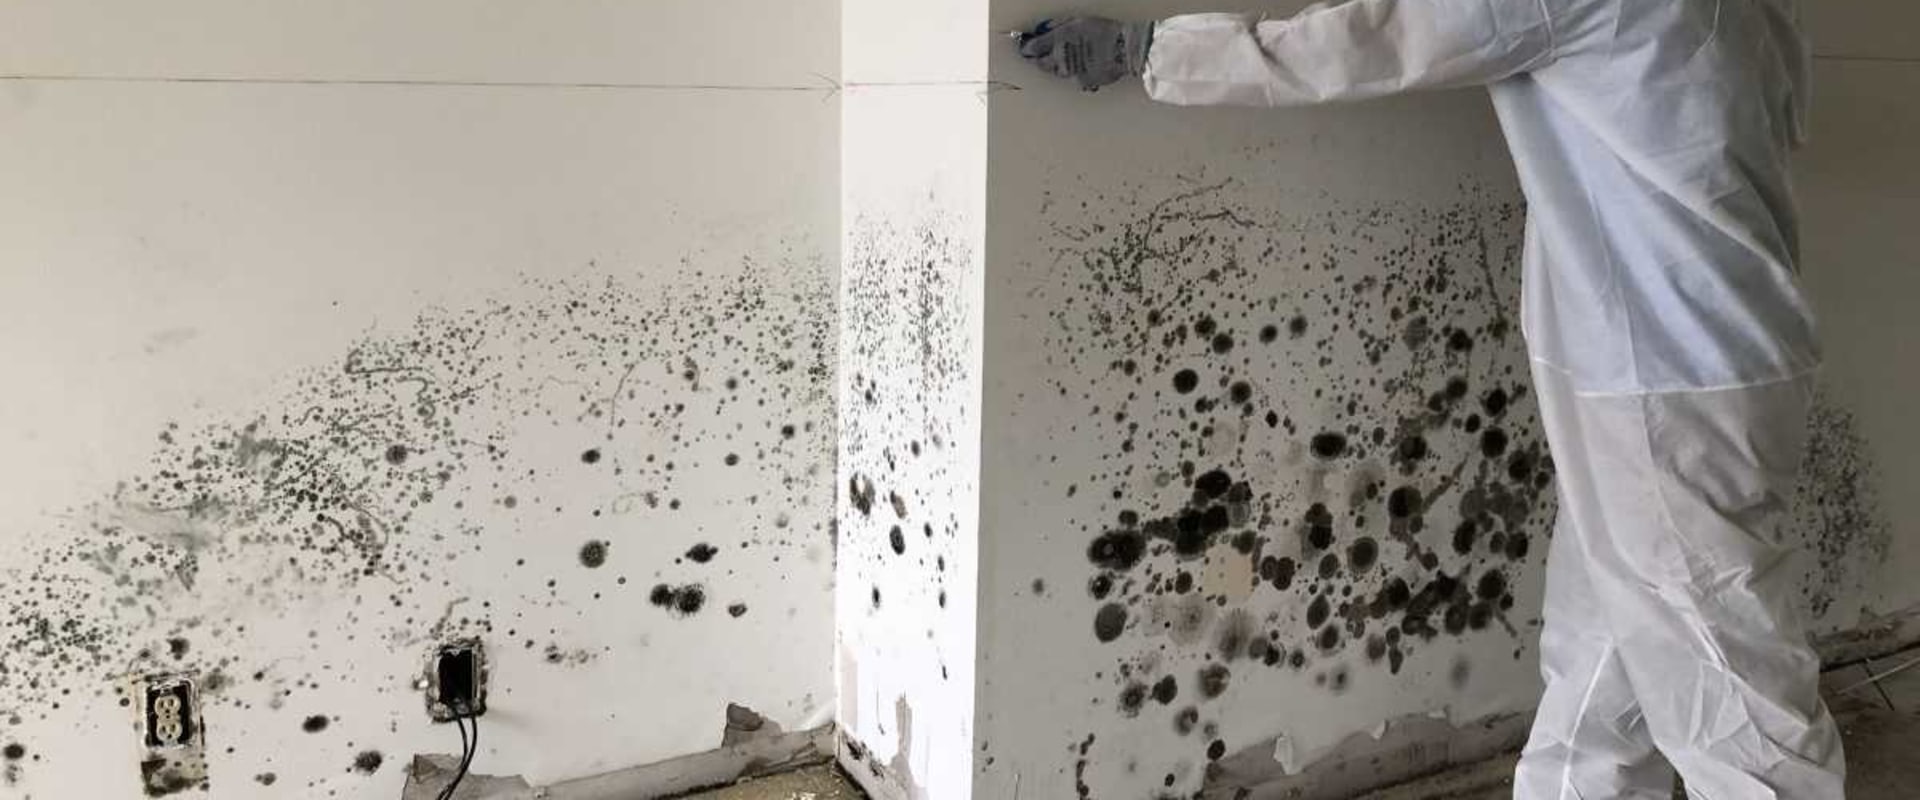 What are the key steps for mold remediation?